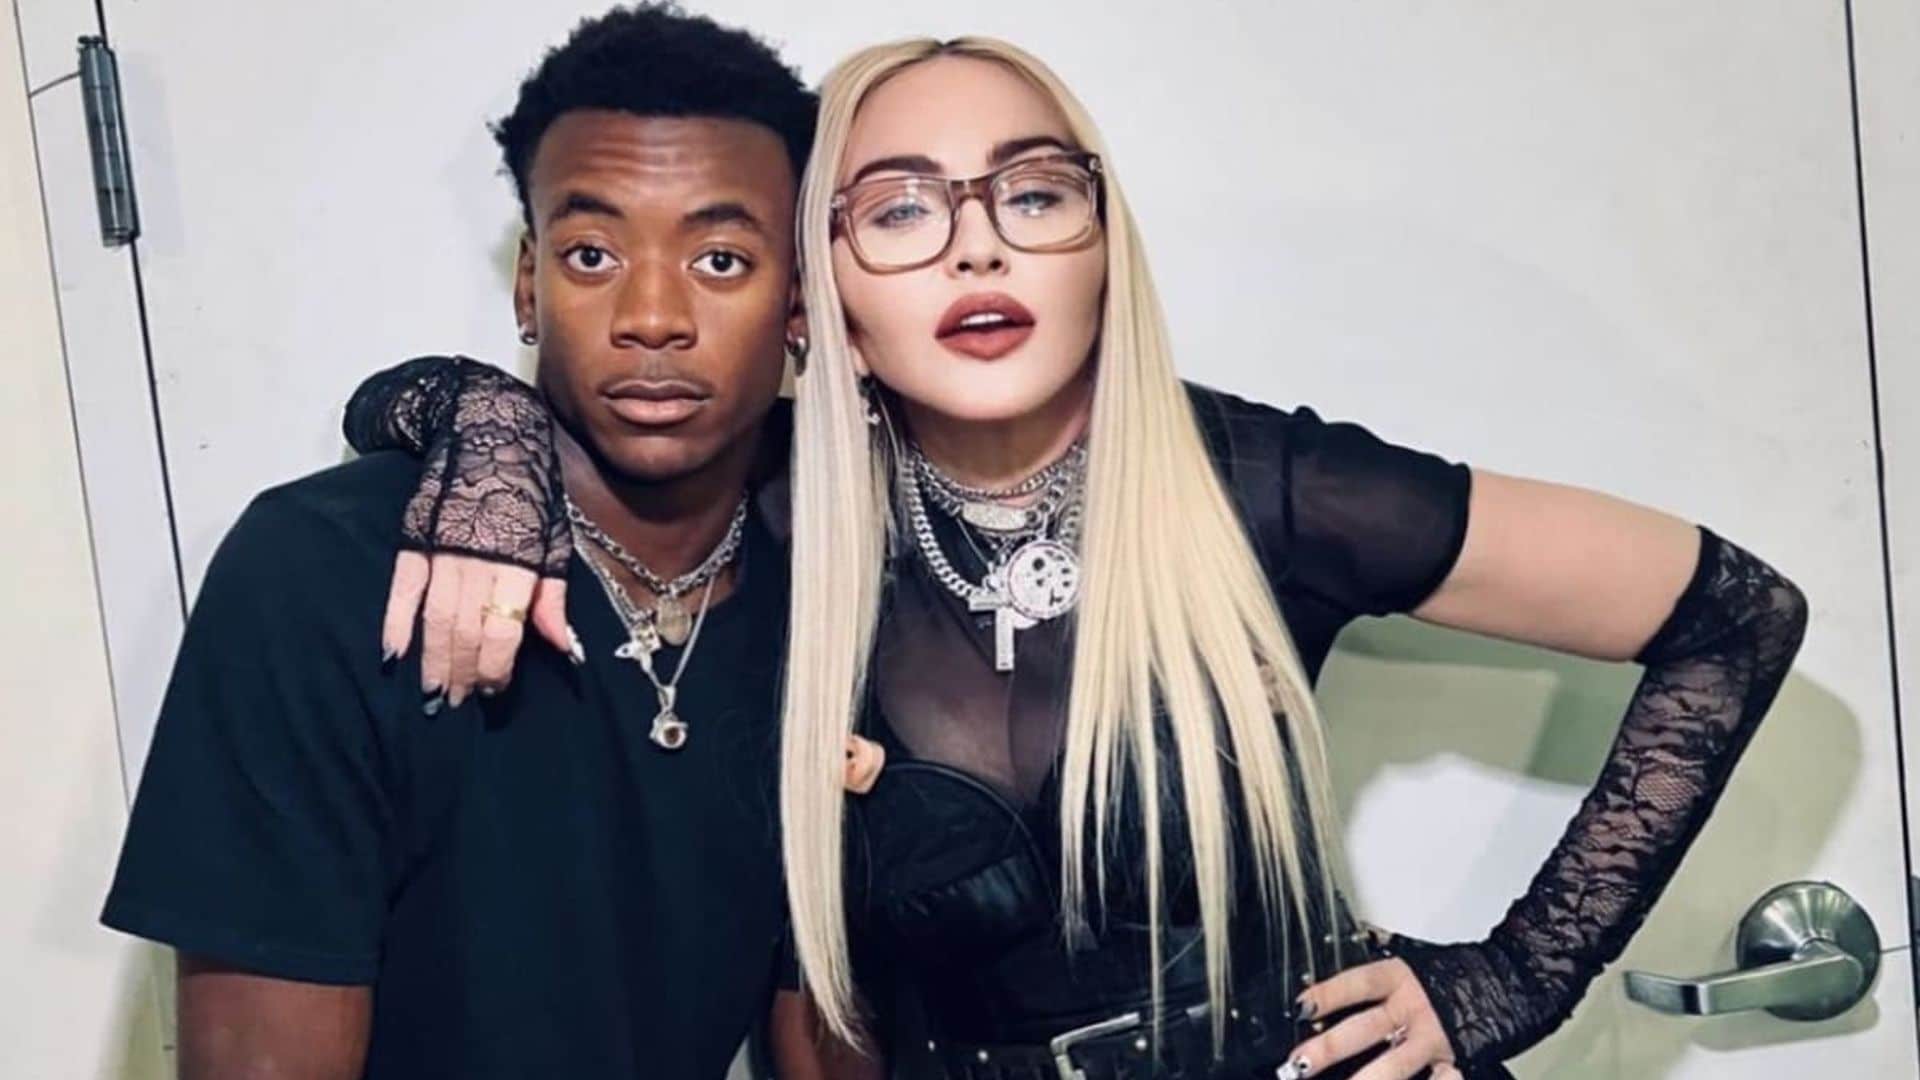 Madonna shares backstage photos with her son David Banda ahead of her Pride performance